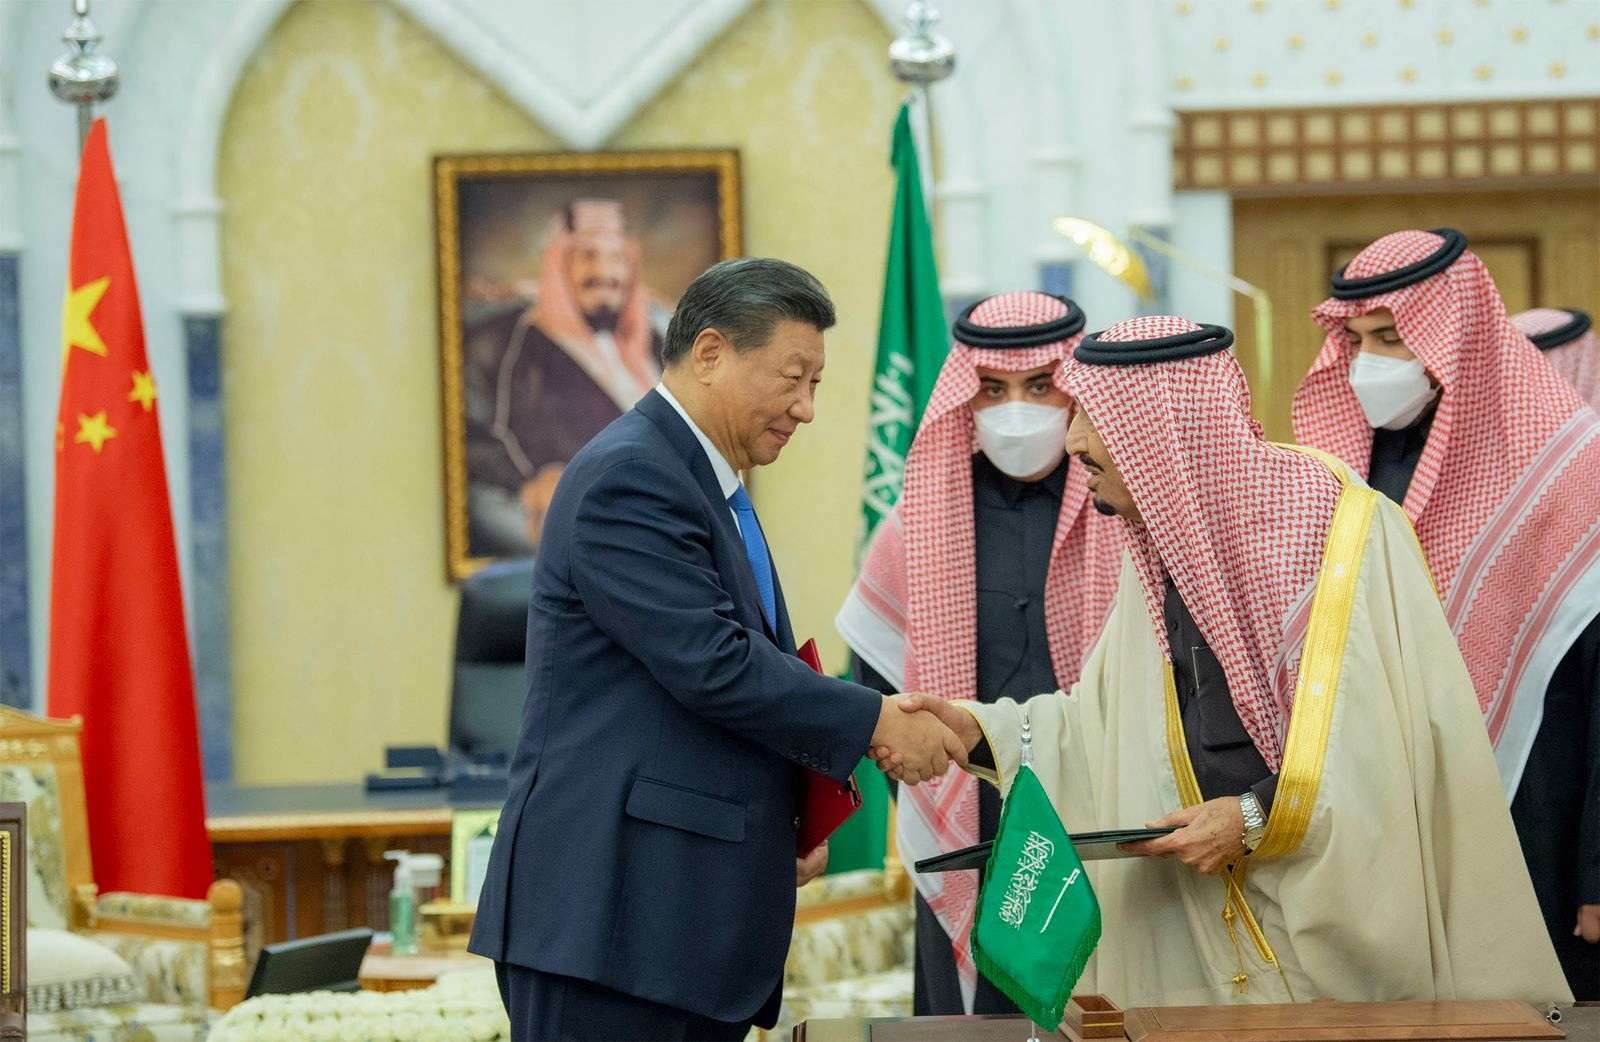 Prospects for China-Arab ties were boosted by the signing of 34 investment agreements during President Xi's visit to Saudi Arabia.